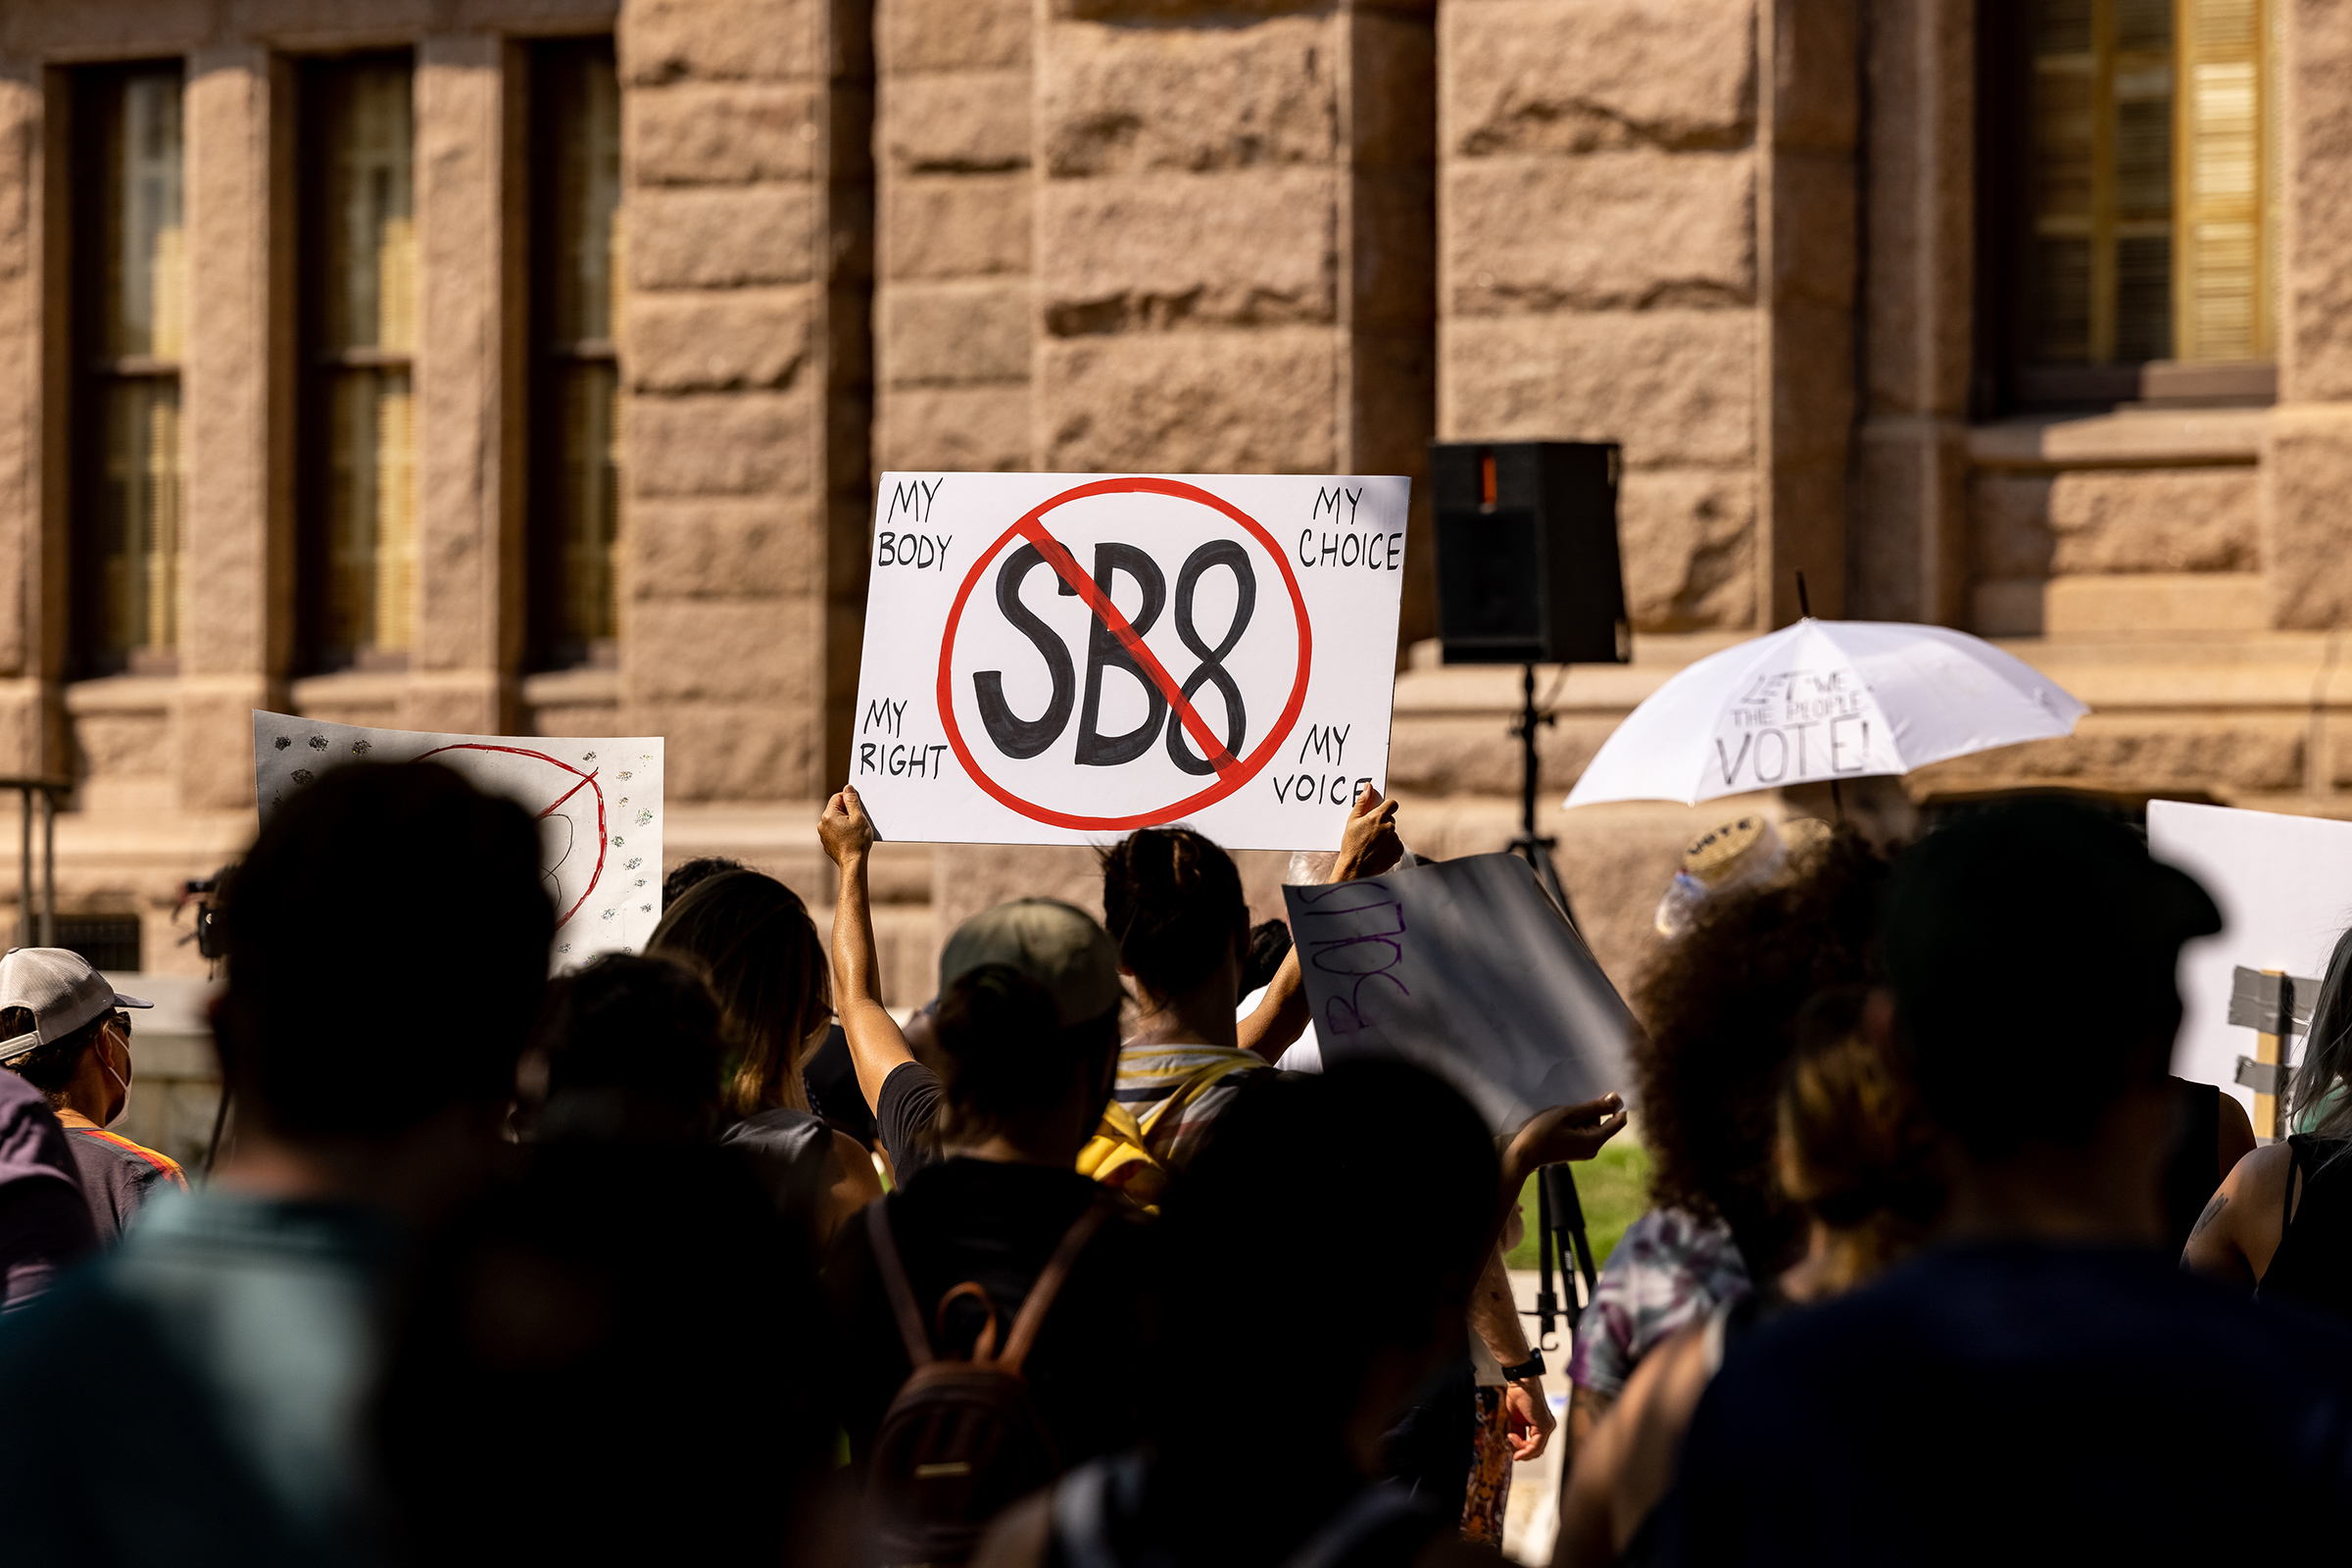 Abortion rights activists rally at the Texas State Capitol in Austin, Texas on Sept. 11, 2021.